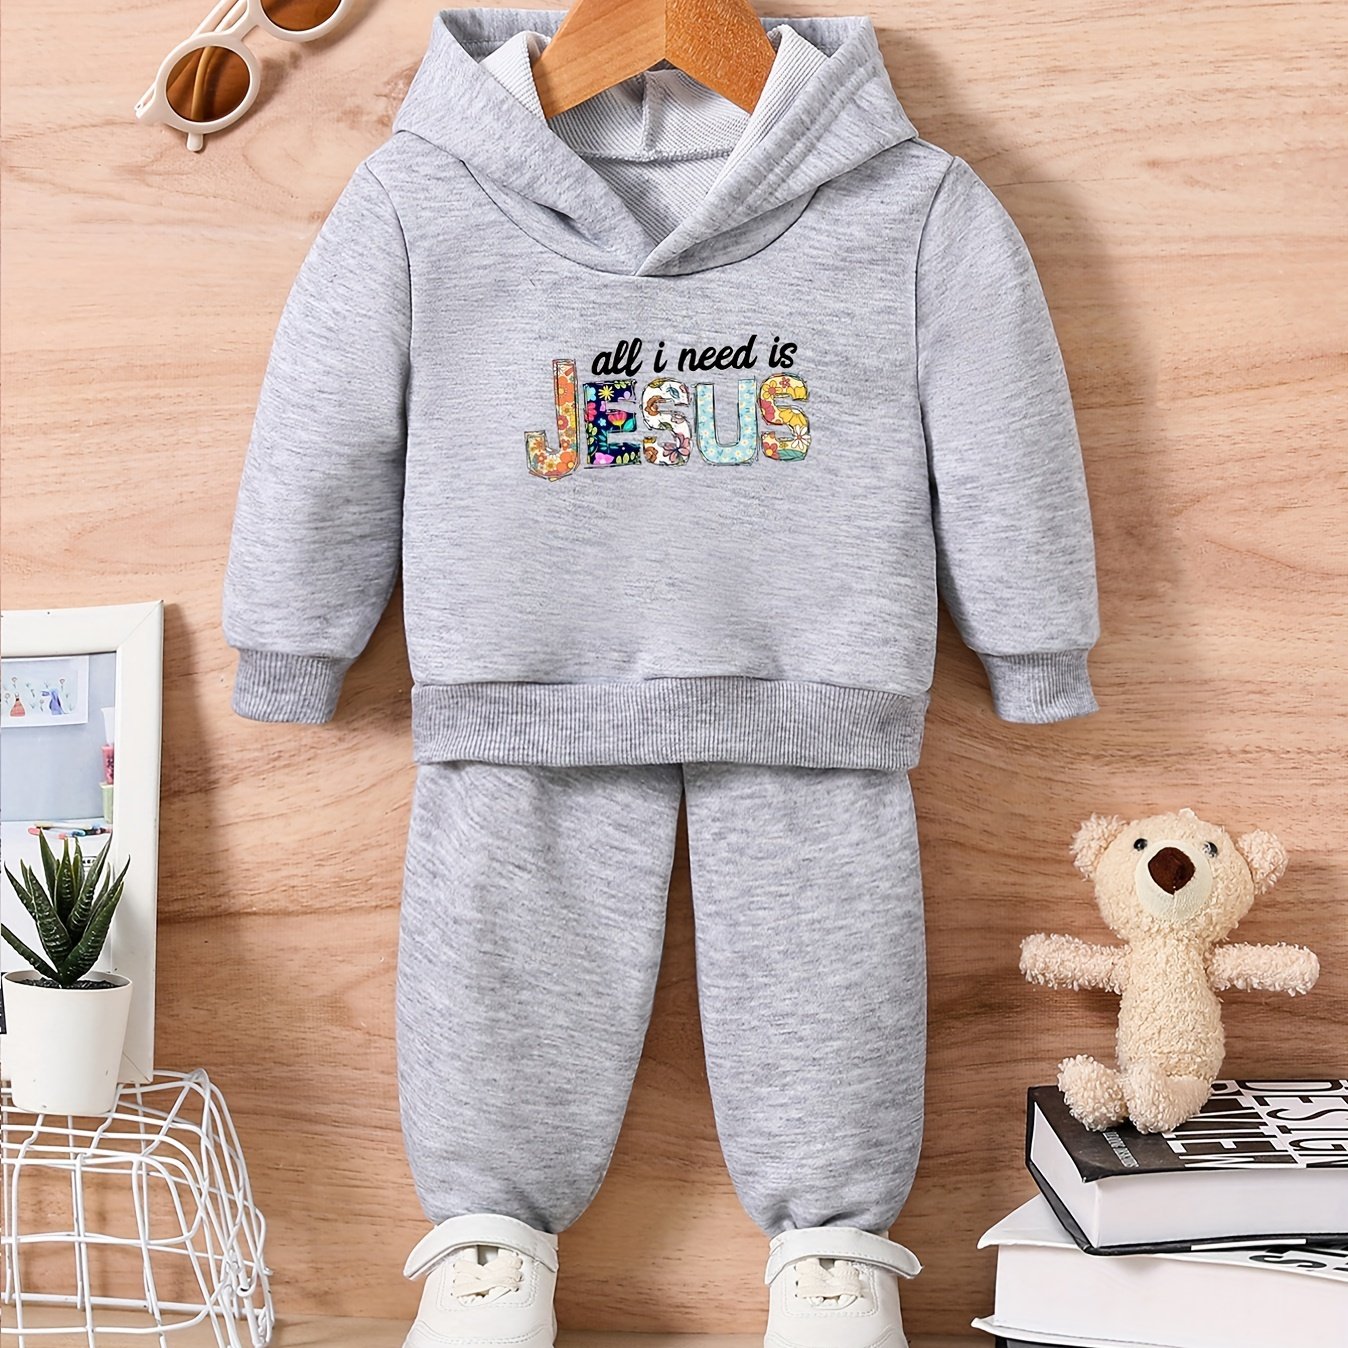 All I Need Is Jesus Toddler Christian Casual Outfit claimedbygoddesigns